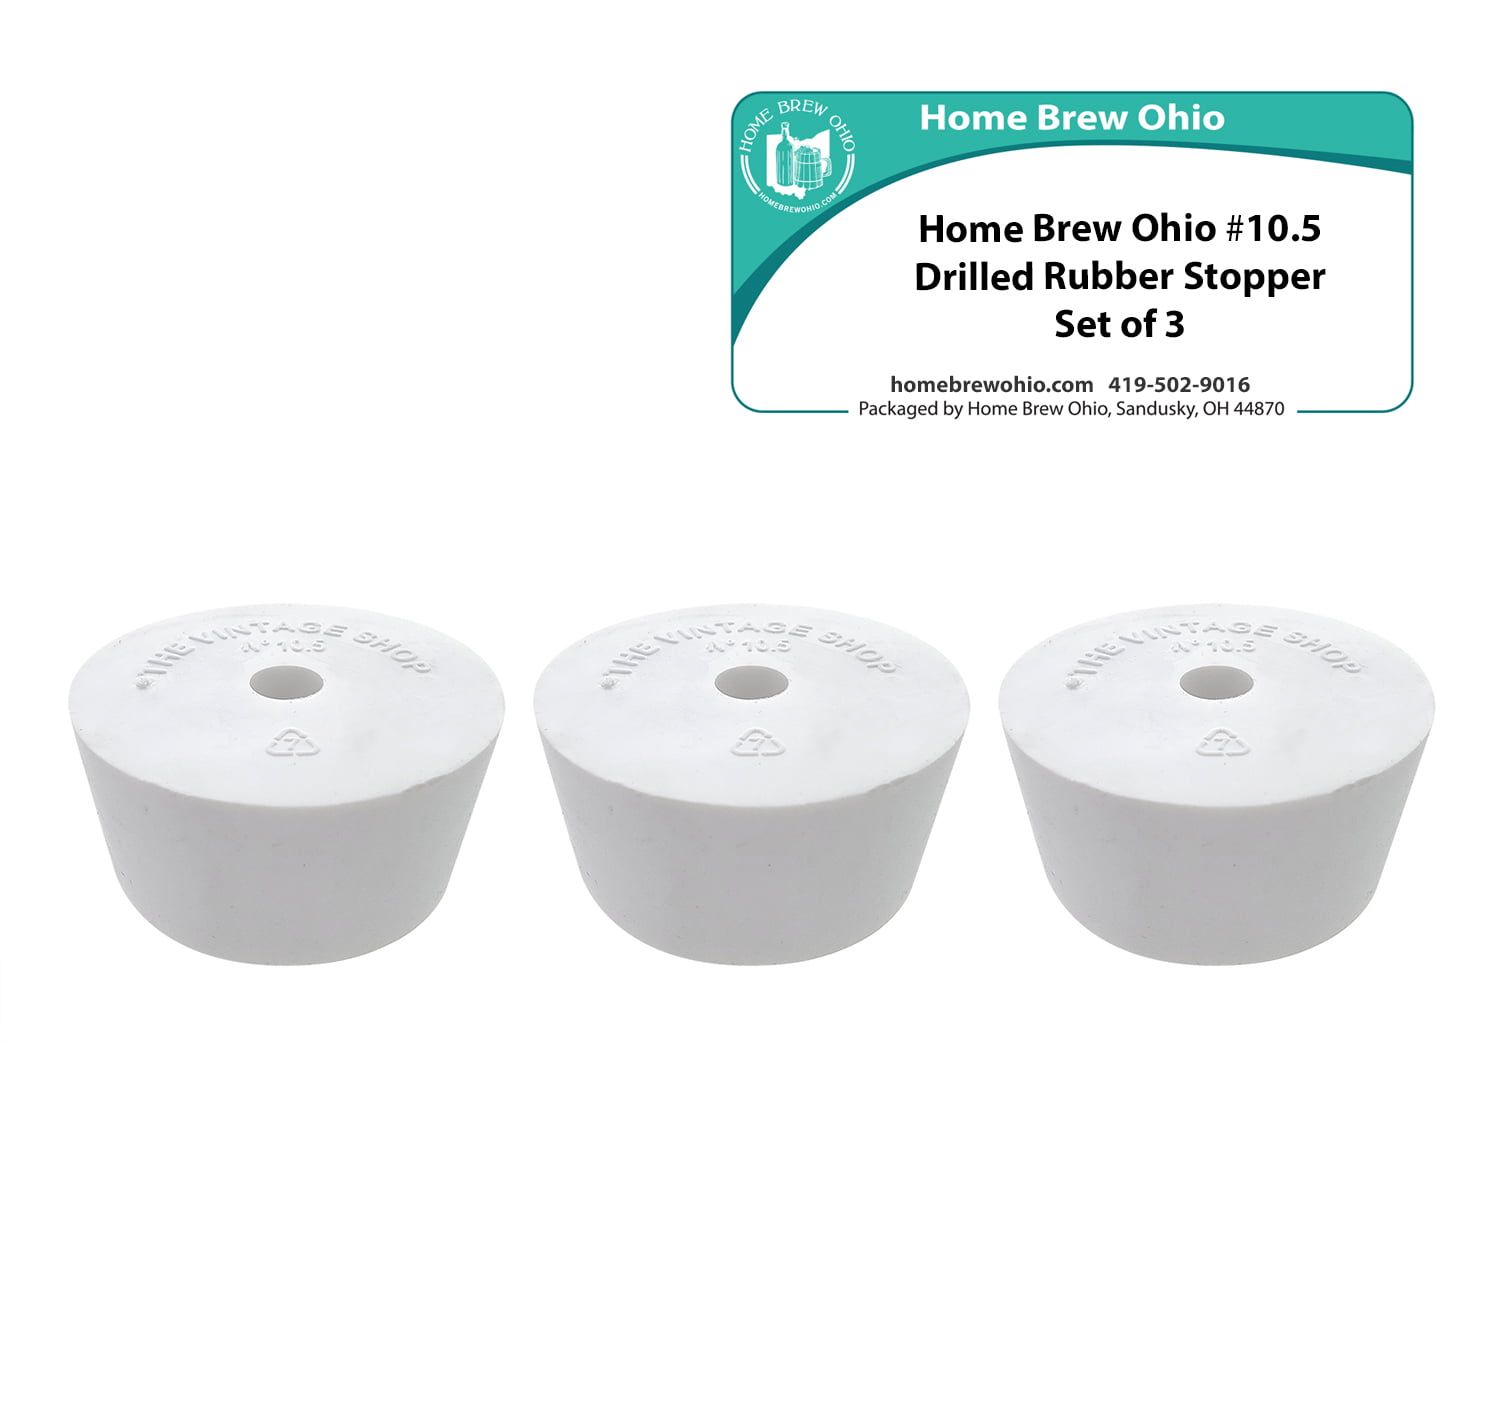 Home Brew Ohio #10 Drilled Rubber Stopper Set of 3 